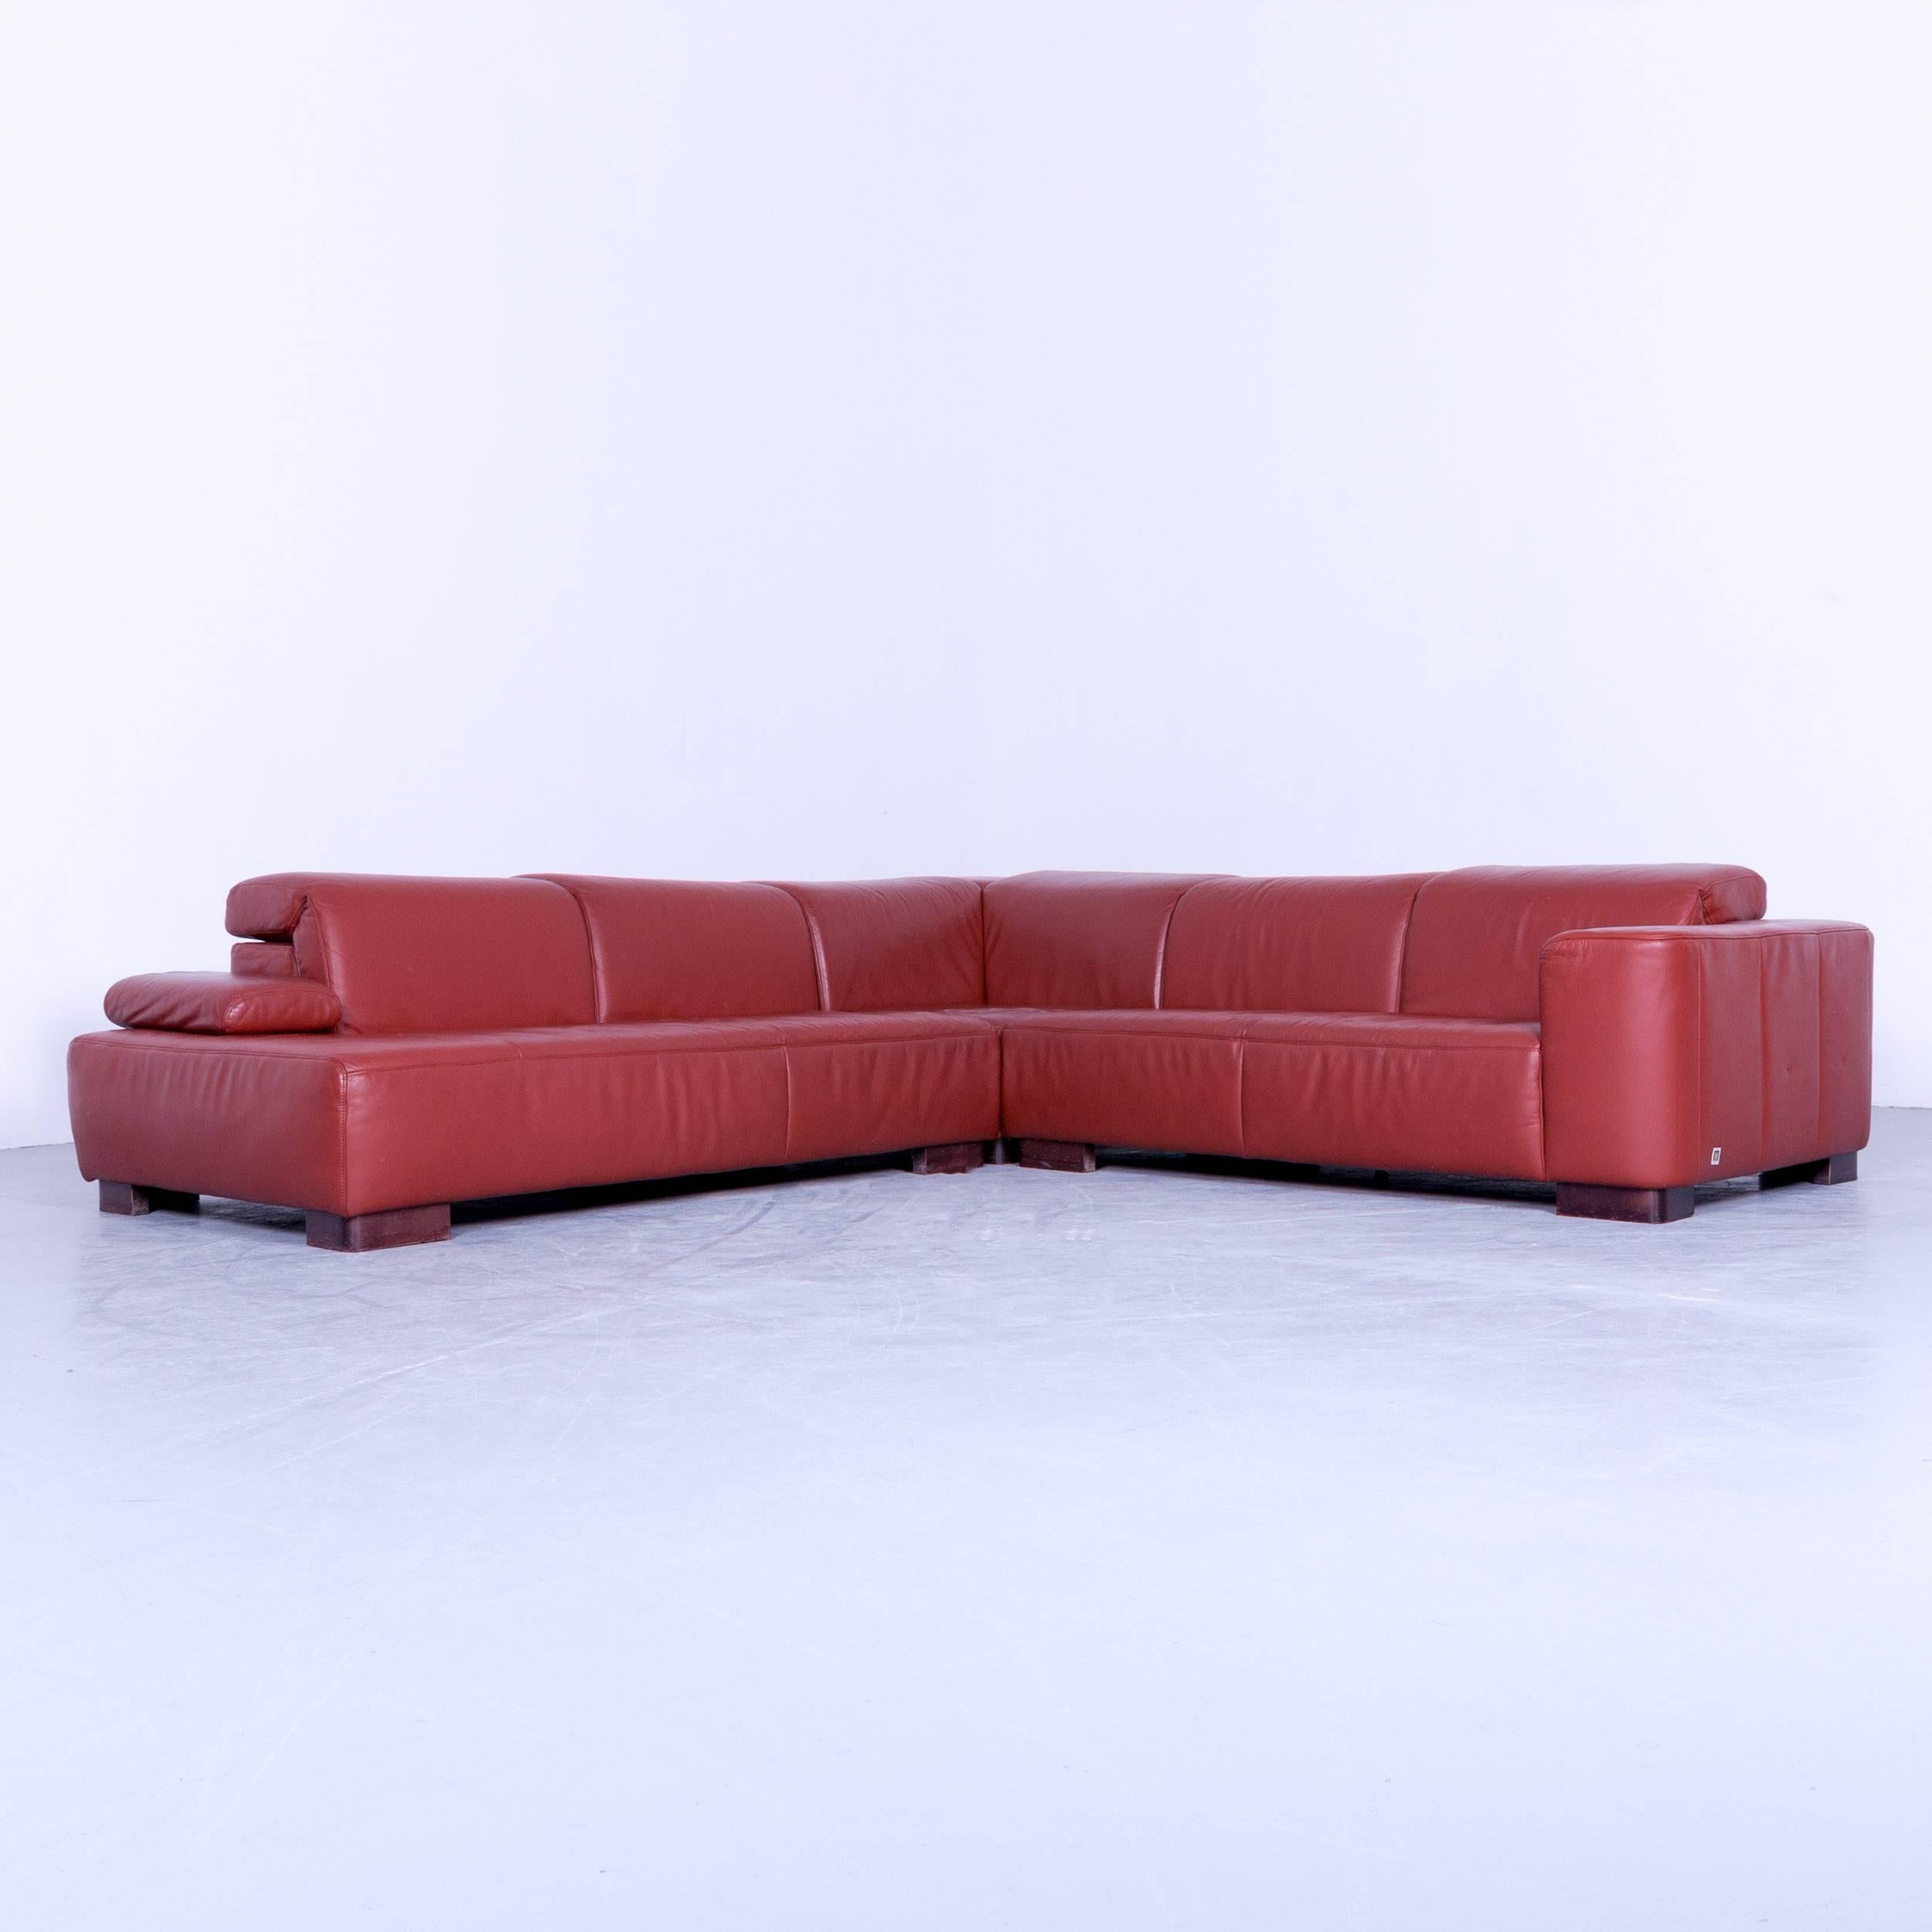 Ewald Schillig designer corner sofa and armchair orange red leather function, in a minimalistic and modern design, with convenient functions, made for pure comfort and flexibility.